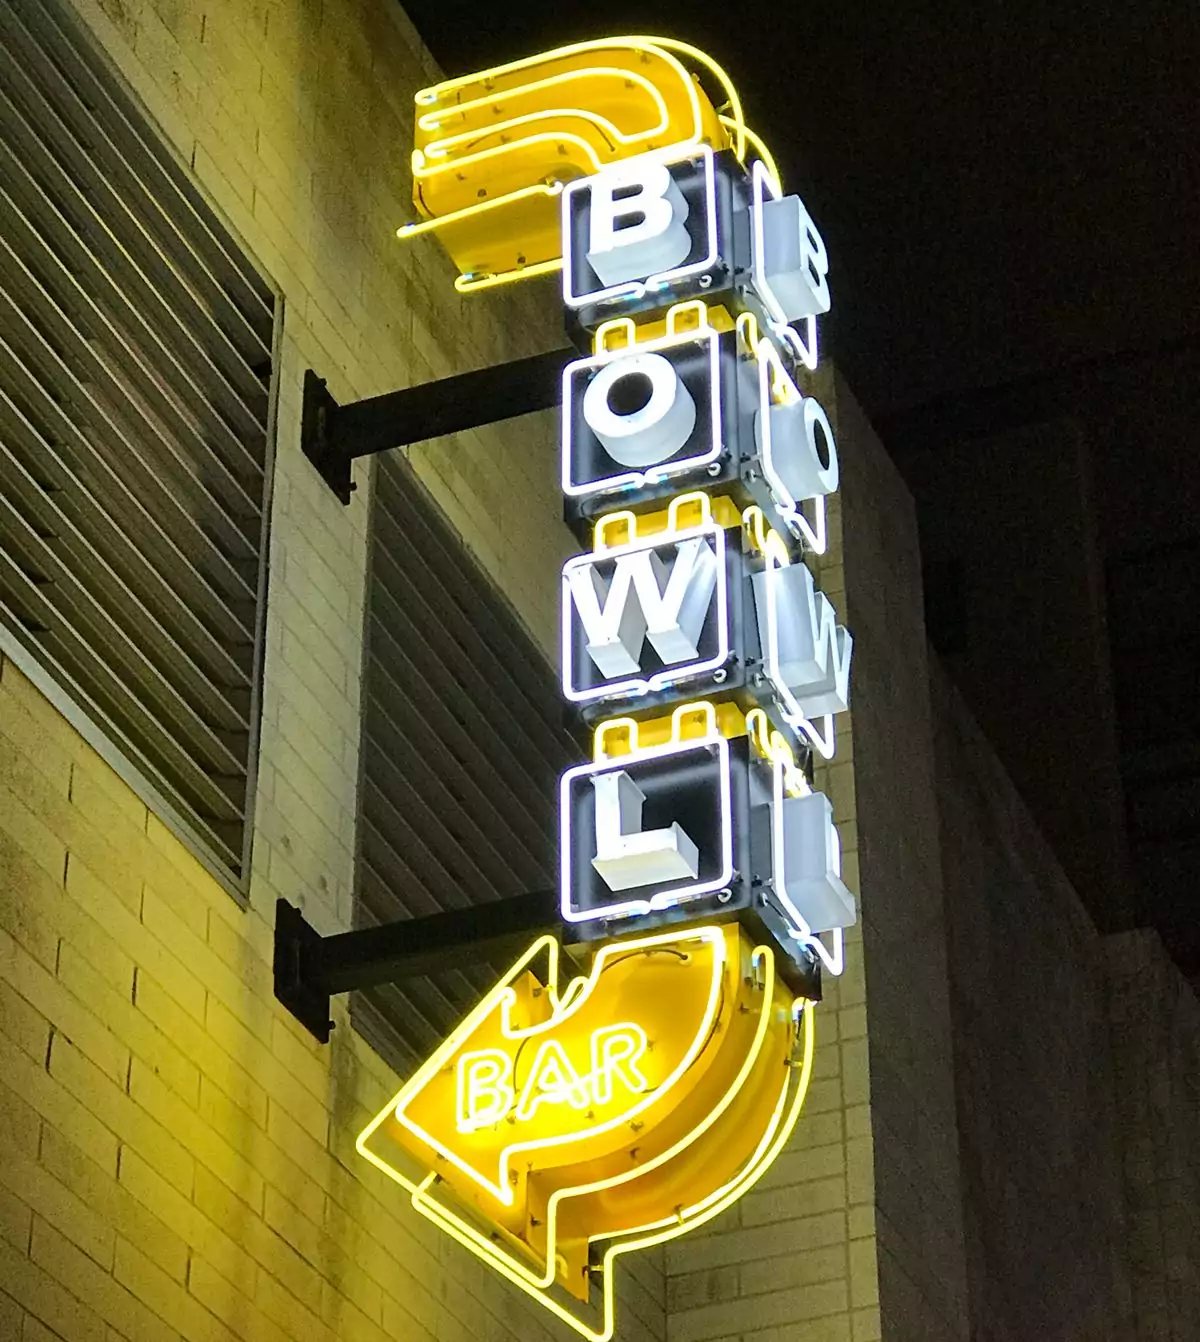 Oracle Signs Texas - Photo of a bowling sign. It is a glowing yellow neon sign